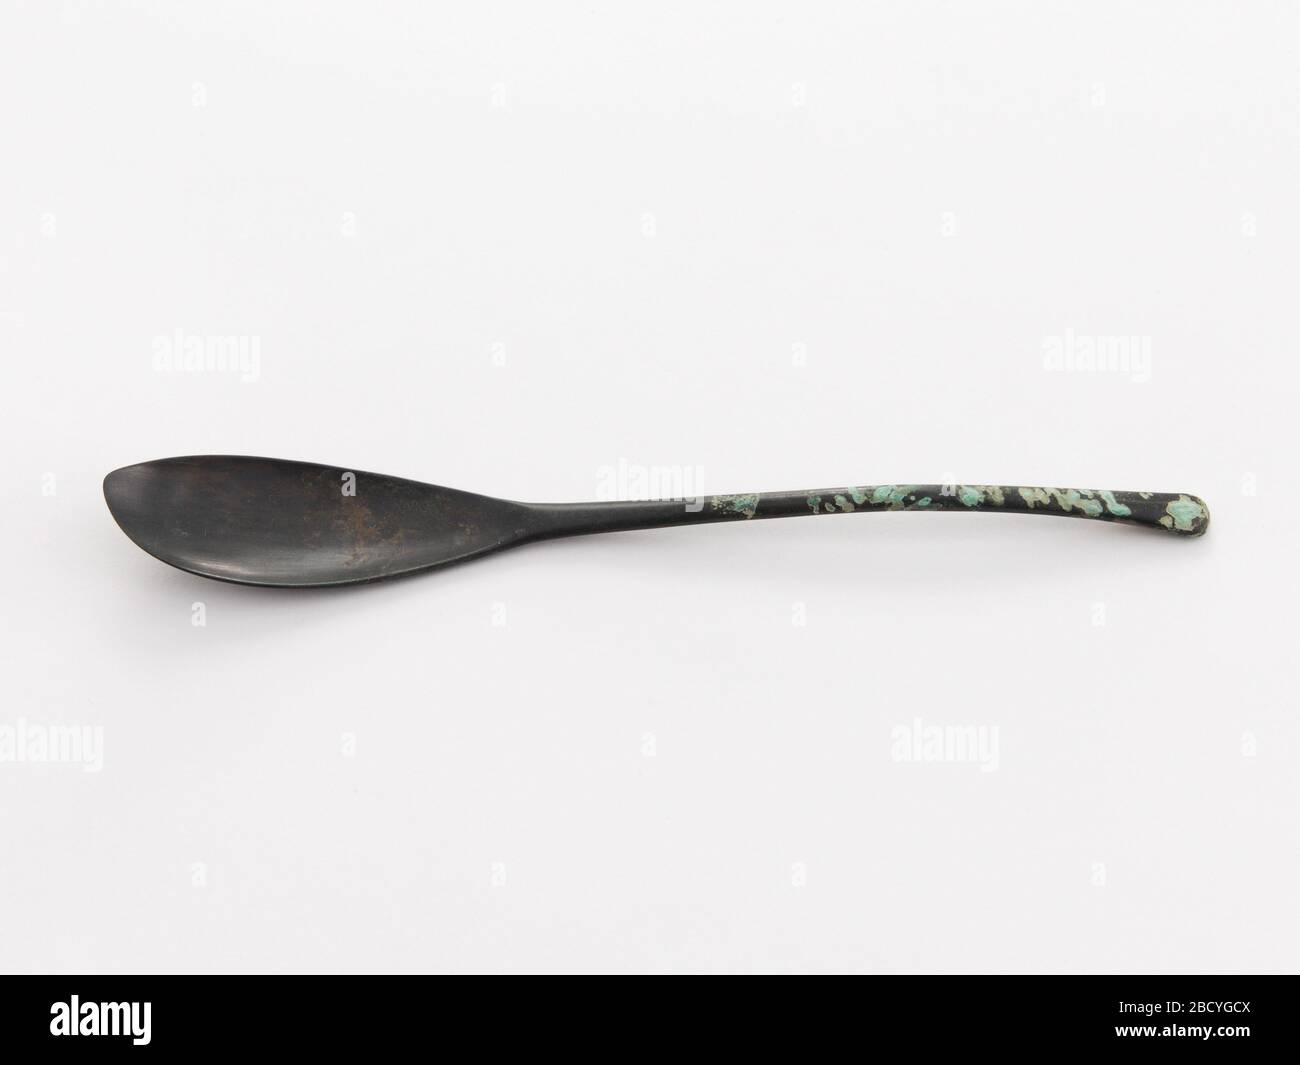 Spoon. Yamanaka and Co. (C.L. Freer source)Charles Lang Freer (1854-1919)Reportedly excavated at Gaeseong, Hwanghaebuk-do province, Korea [1]To 1917Mr. S. Yamanaka (Yamanaka & Company), Kyoto, to 1917 [2]From 1917 to 1919Charles Lang Freer (1854-1919), given by Mr. S. F1917.624 Stock Photo